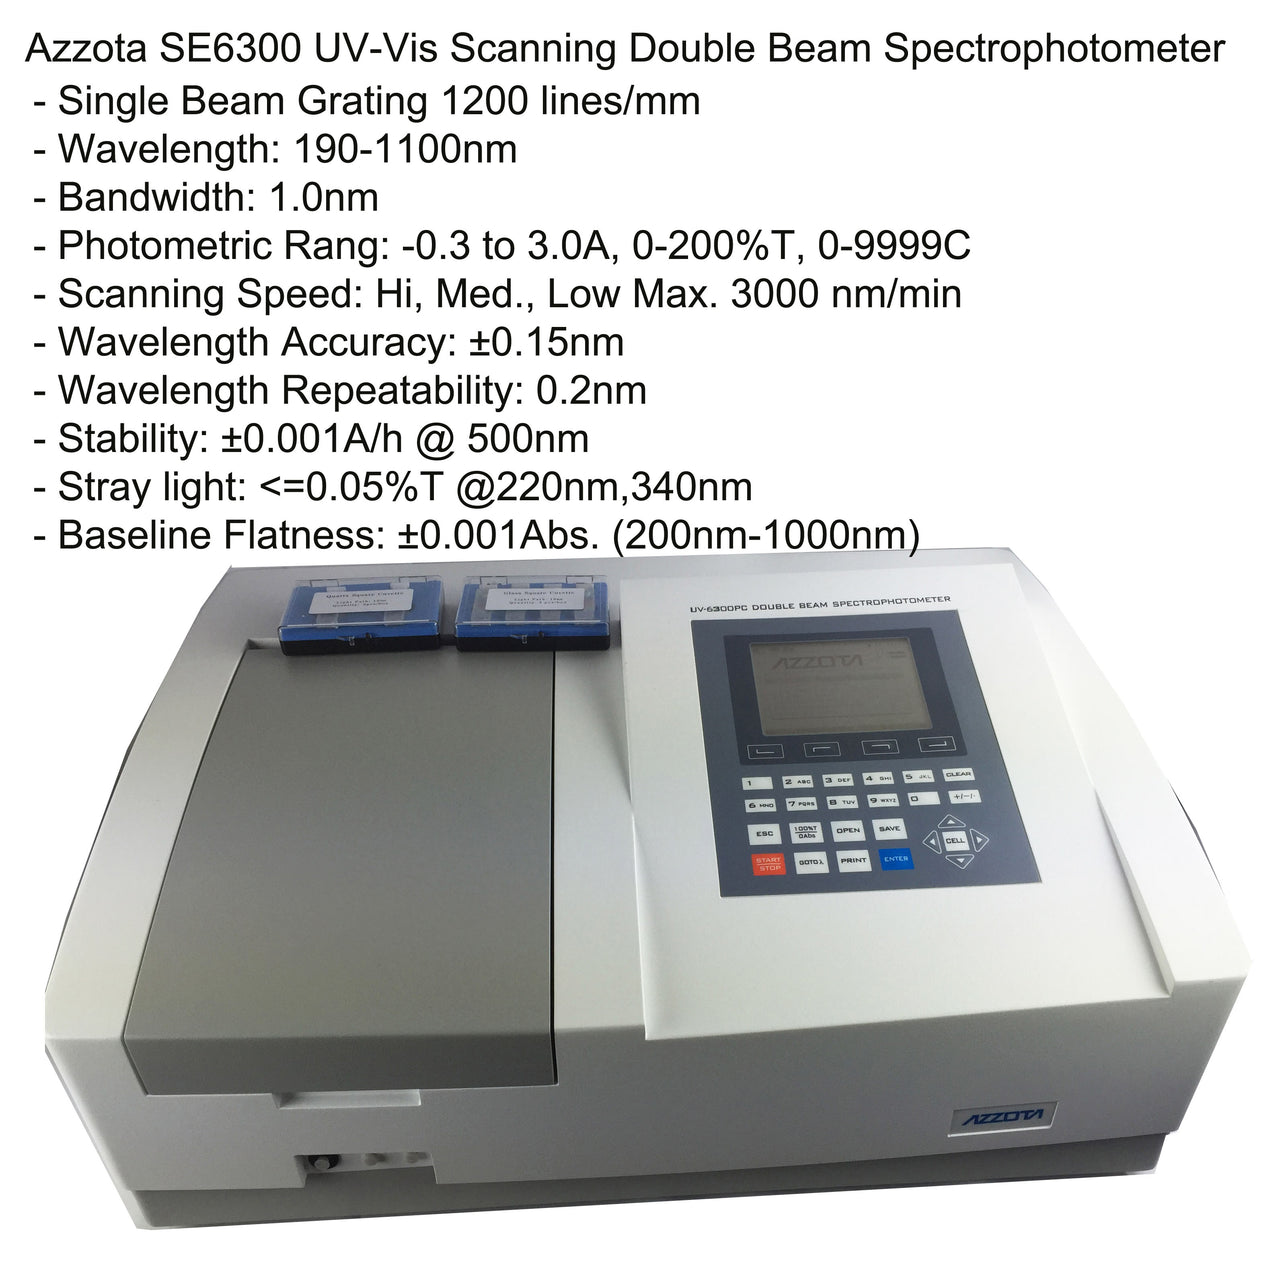 SE6300PC Double Beam Scanning UV-VIS Spectrophotometer with software